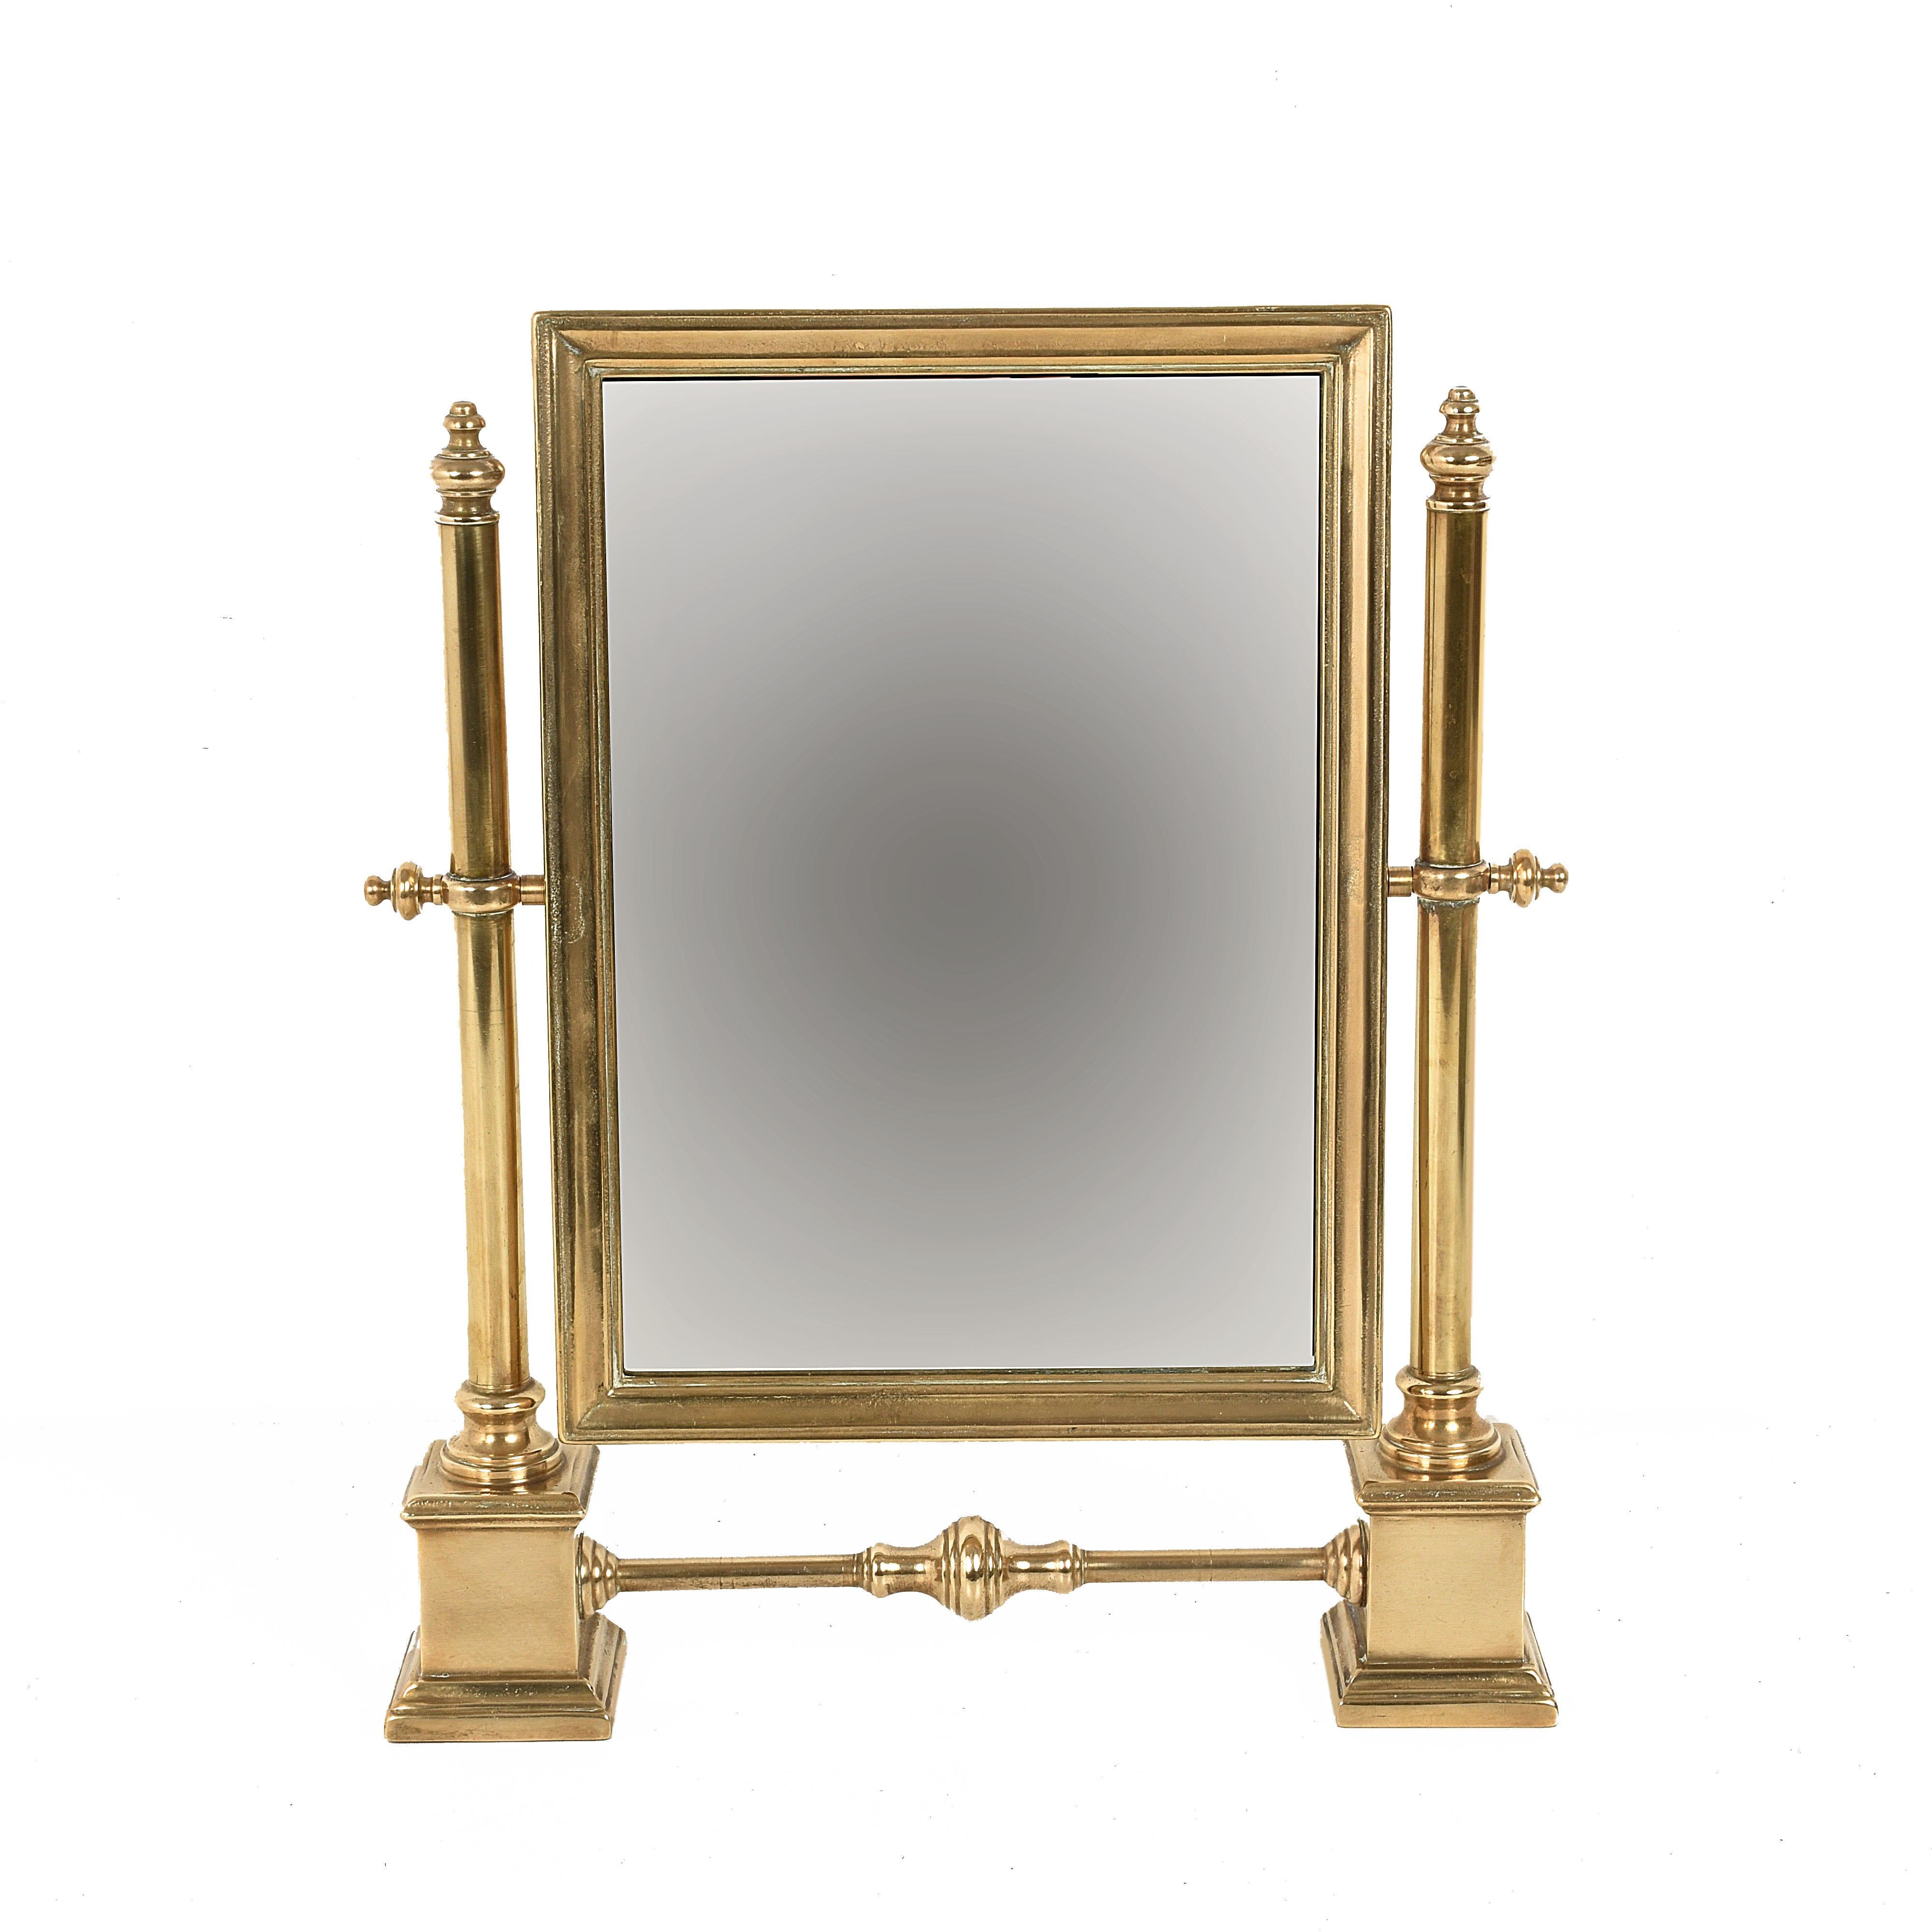 Table Mirror in Polished Brass, Vanity, Adjustable, Italy, 1950s